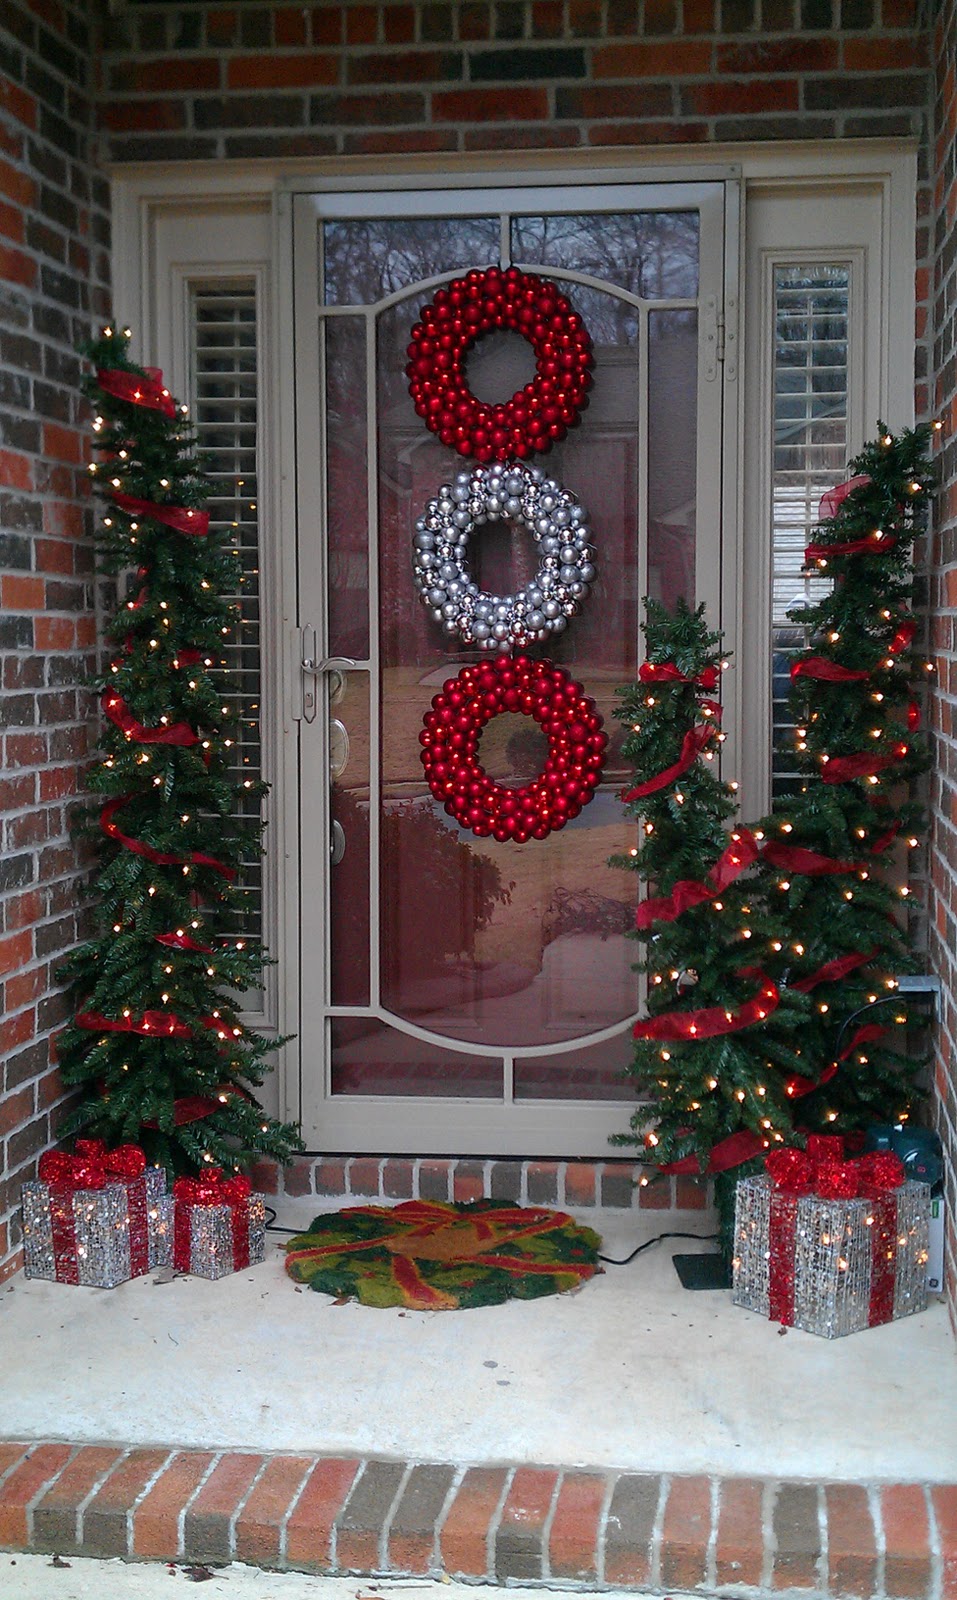 exterior-wonderful-red-and-white-wreath-on-the-glass-front-door-and-three-chriOutdoor-Christmas-Decorating-Front-Porch-Ideas-stmas-tree-on-the-porch-lovely-front-porch-christmas-decorations